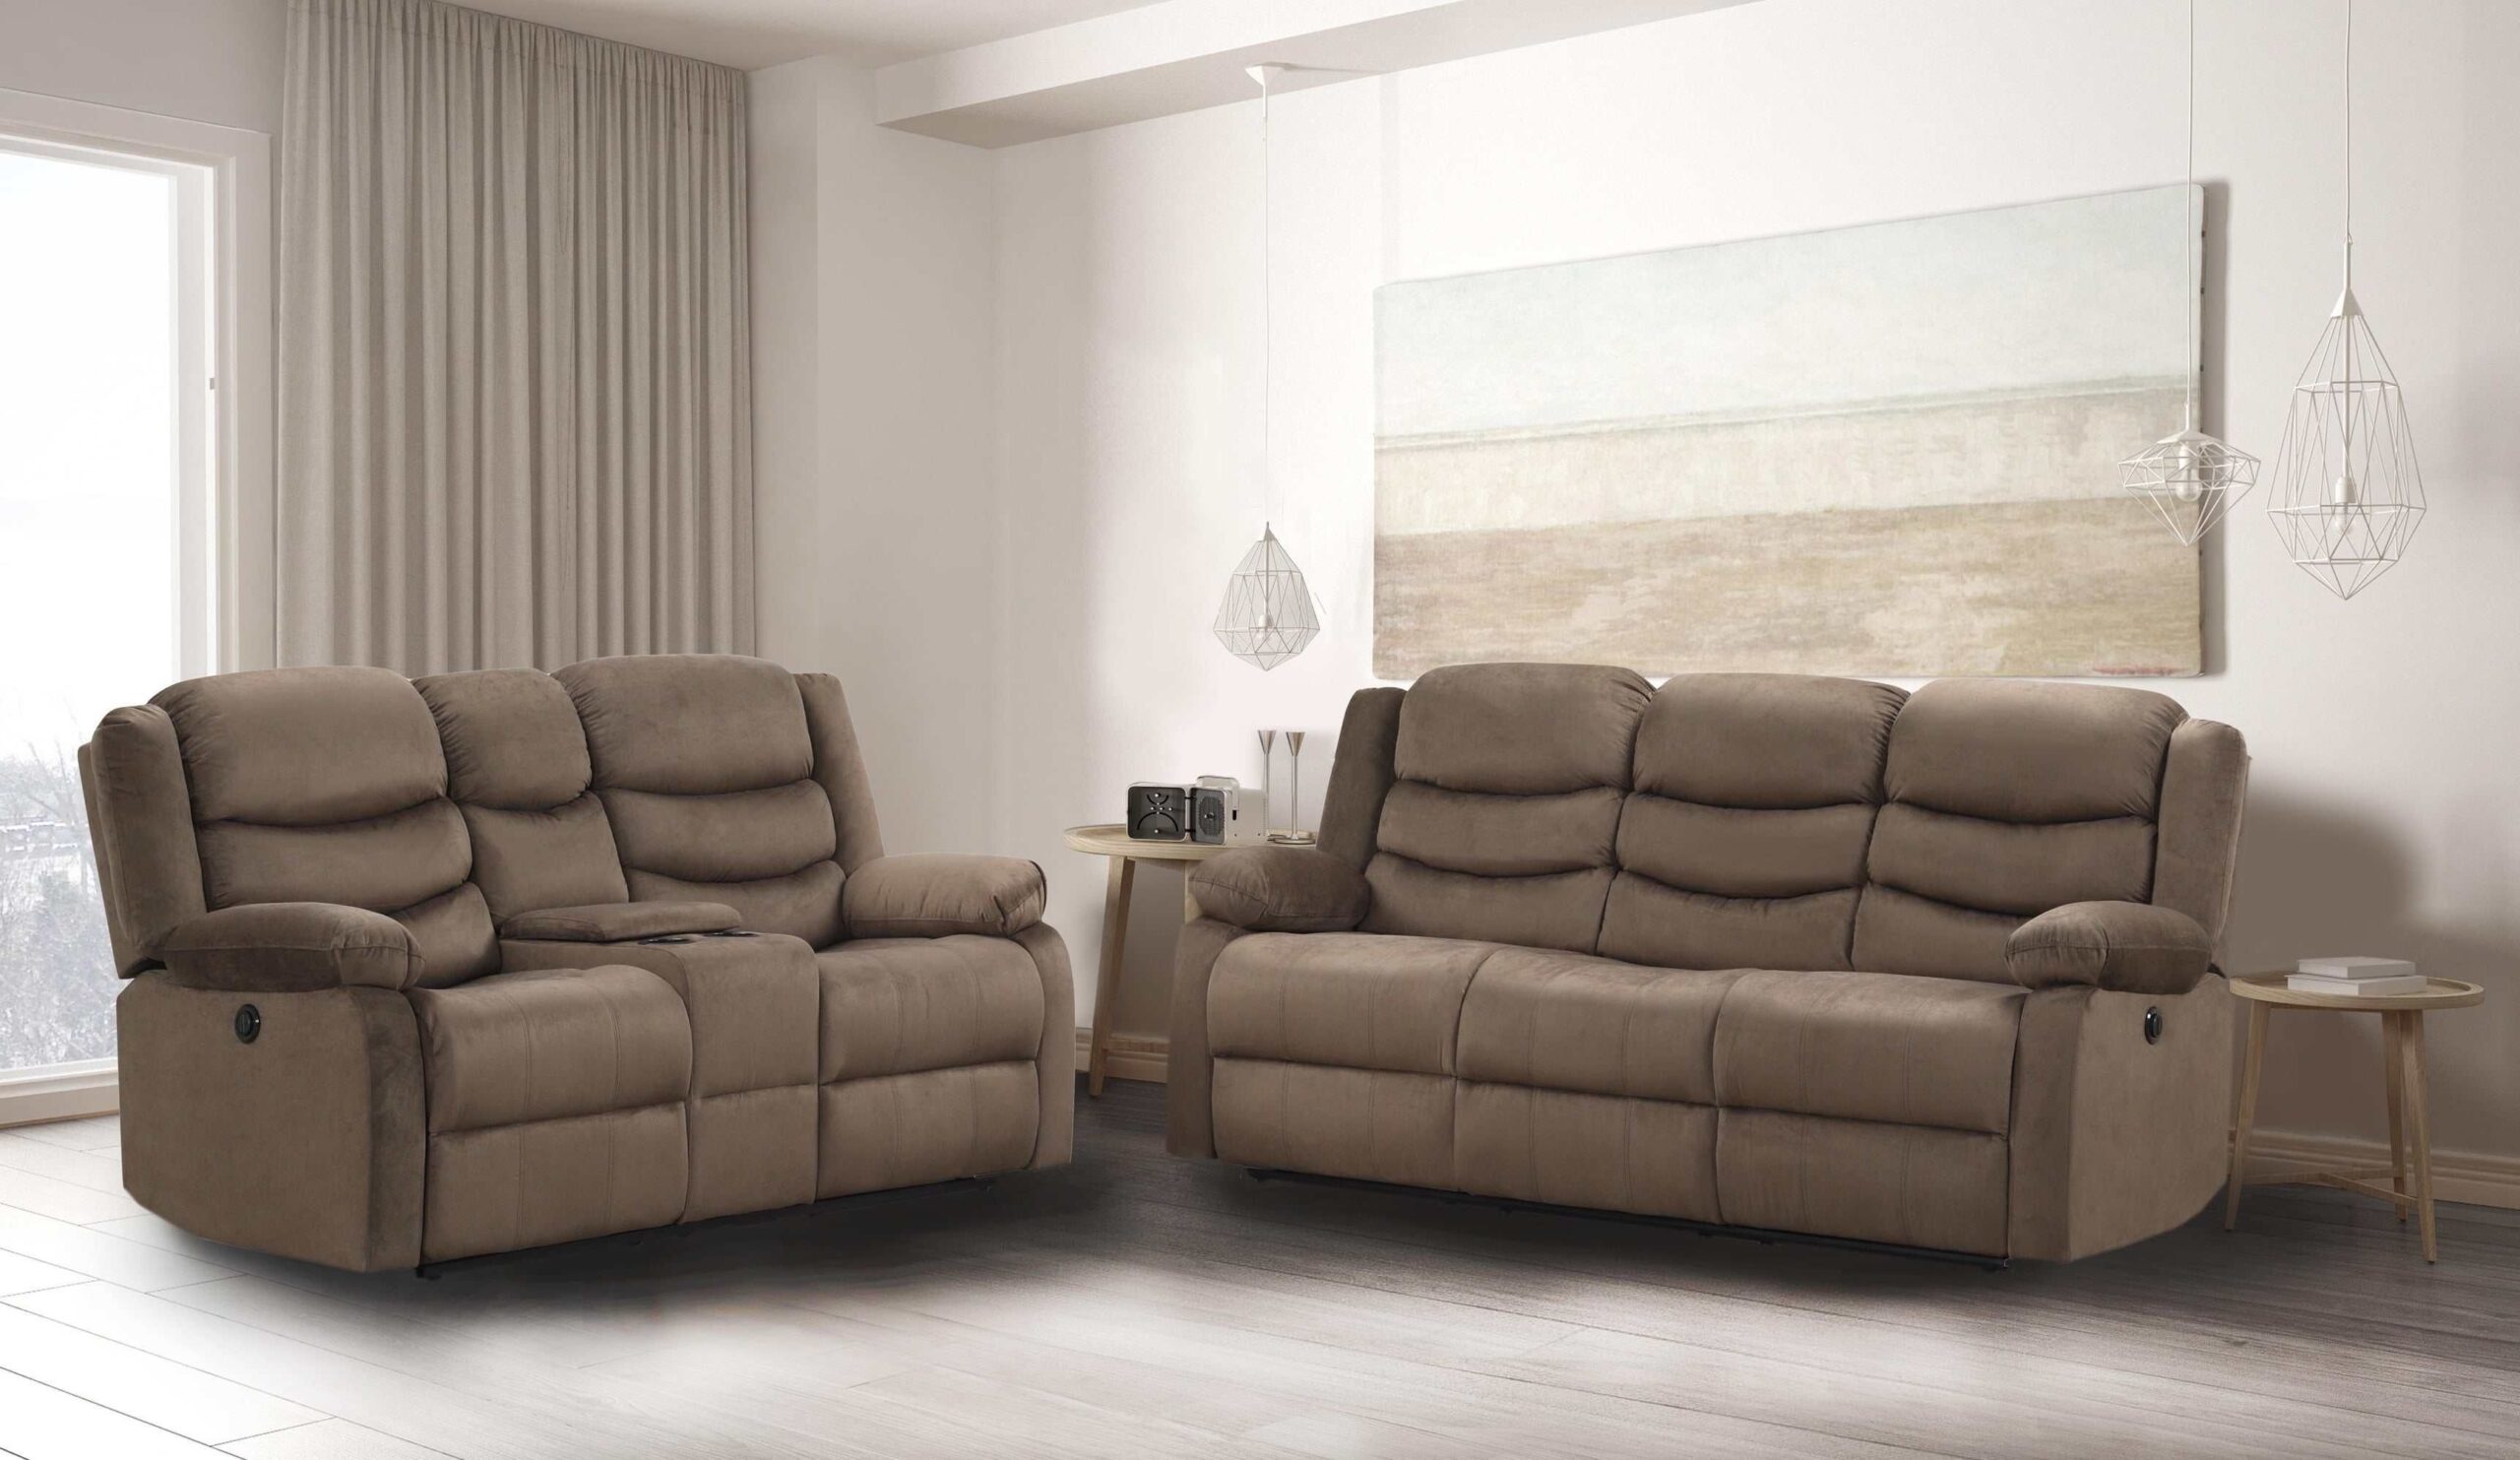 The Ultimate Comfort: Reclining Loveseat with Console